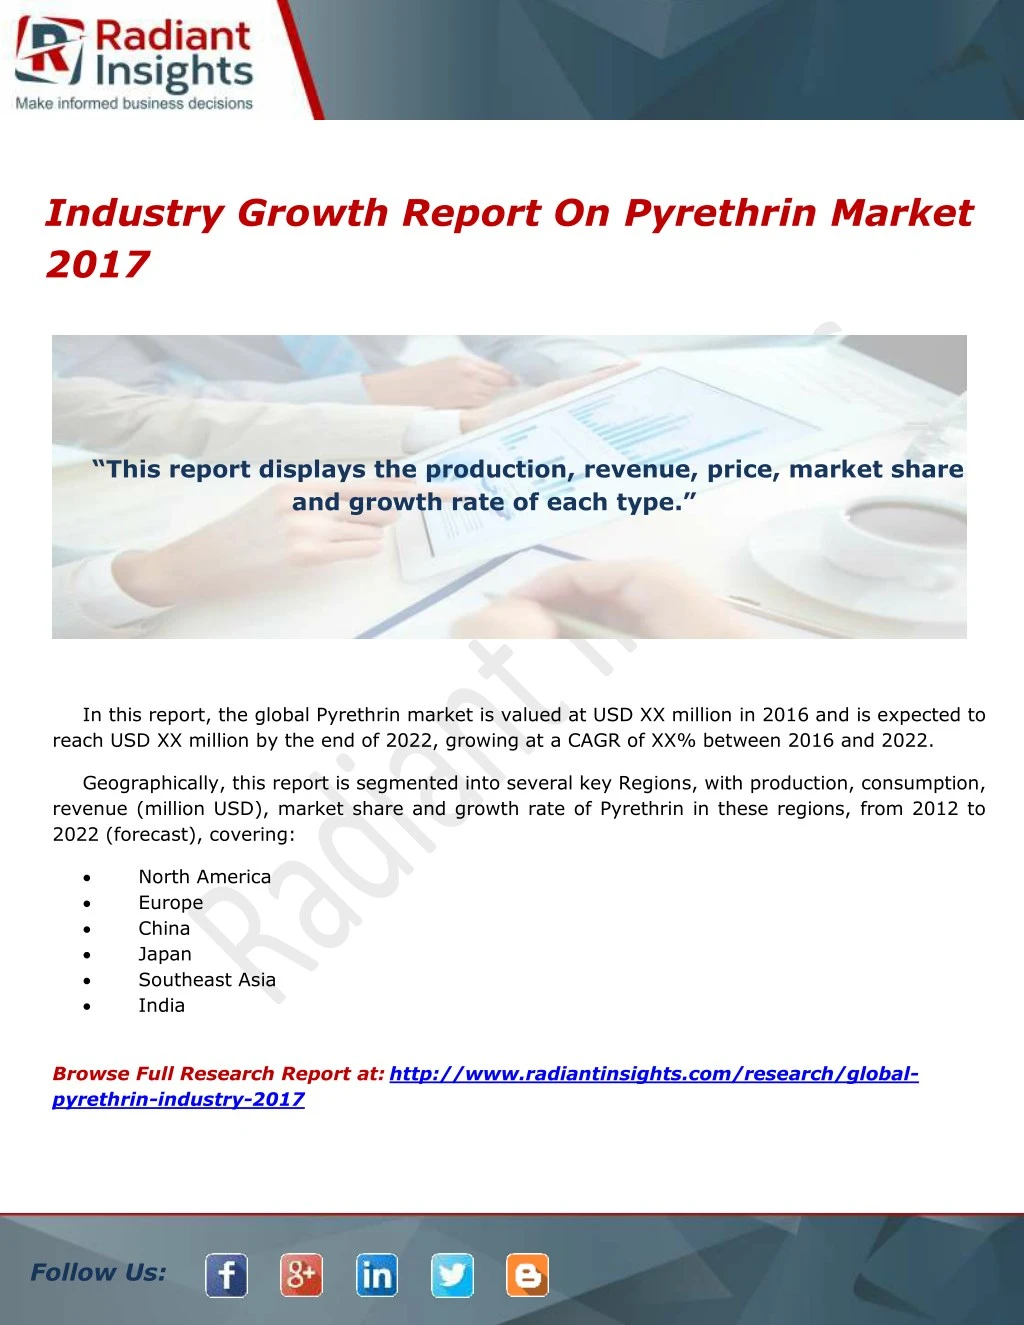 industry growth report on pyrethrin market 2017